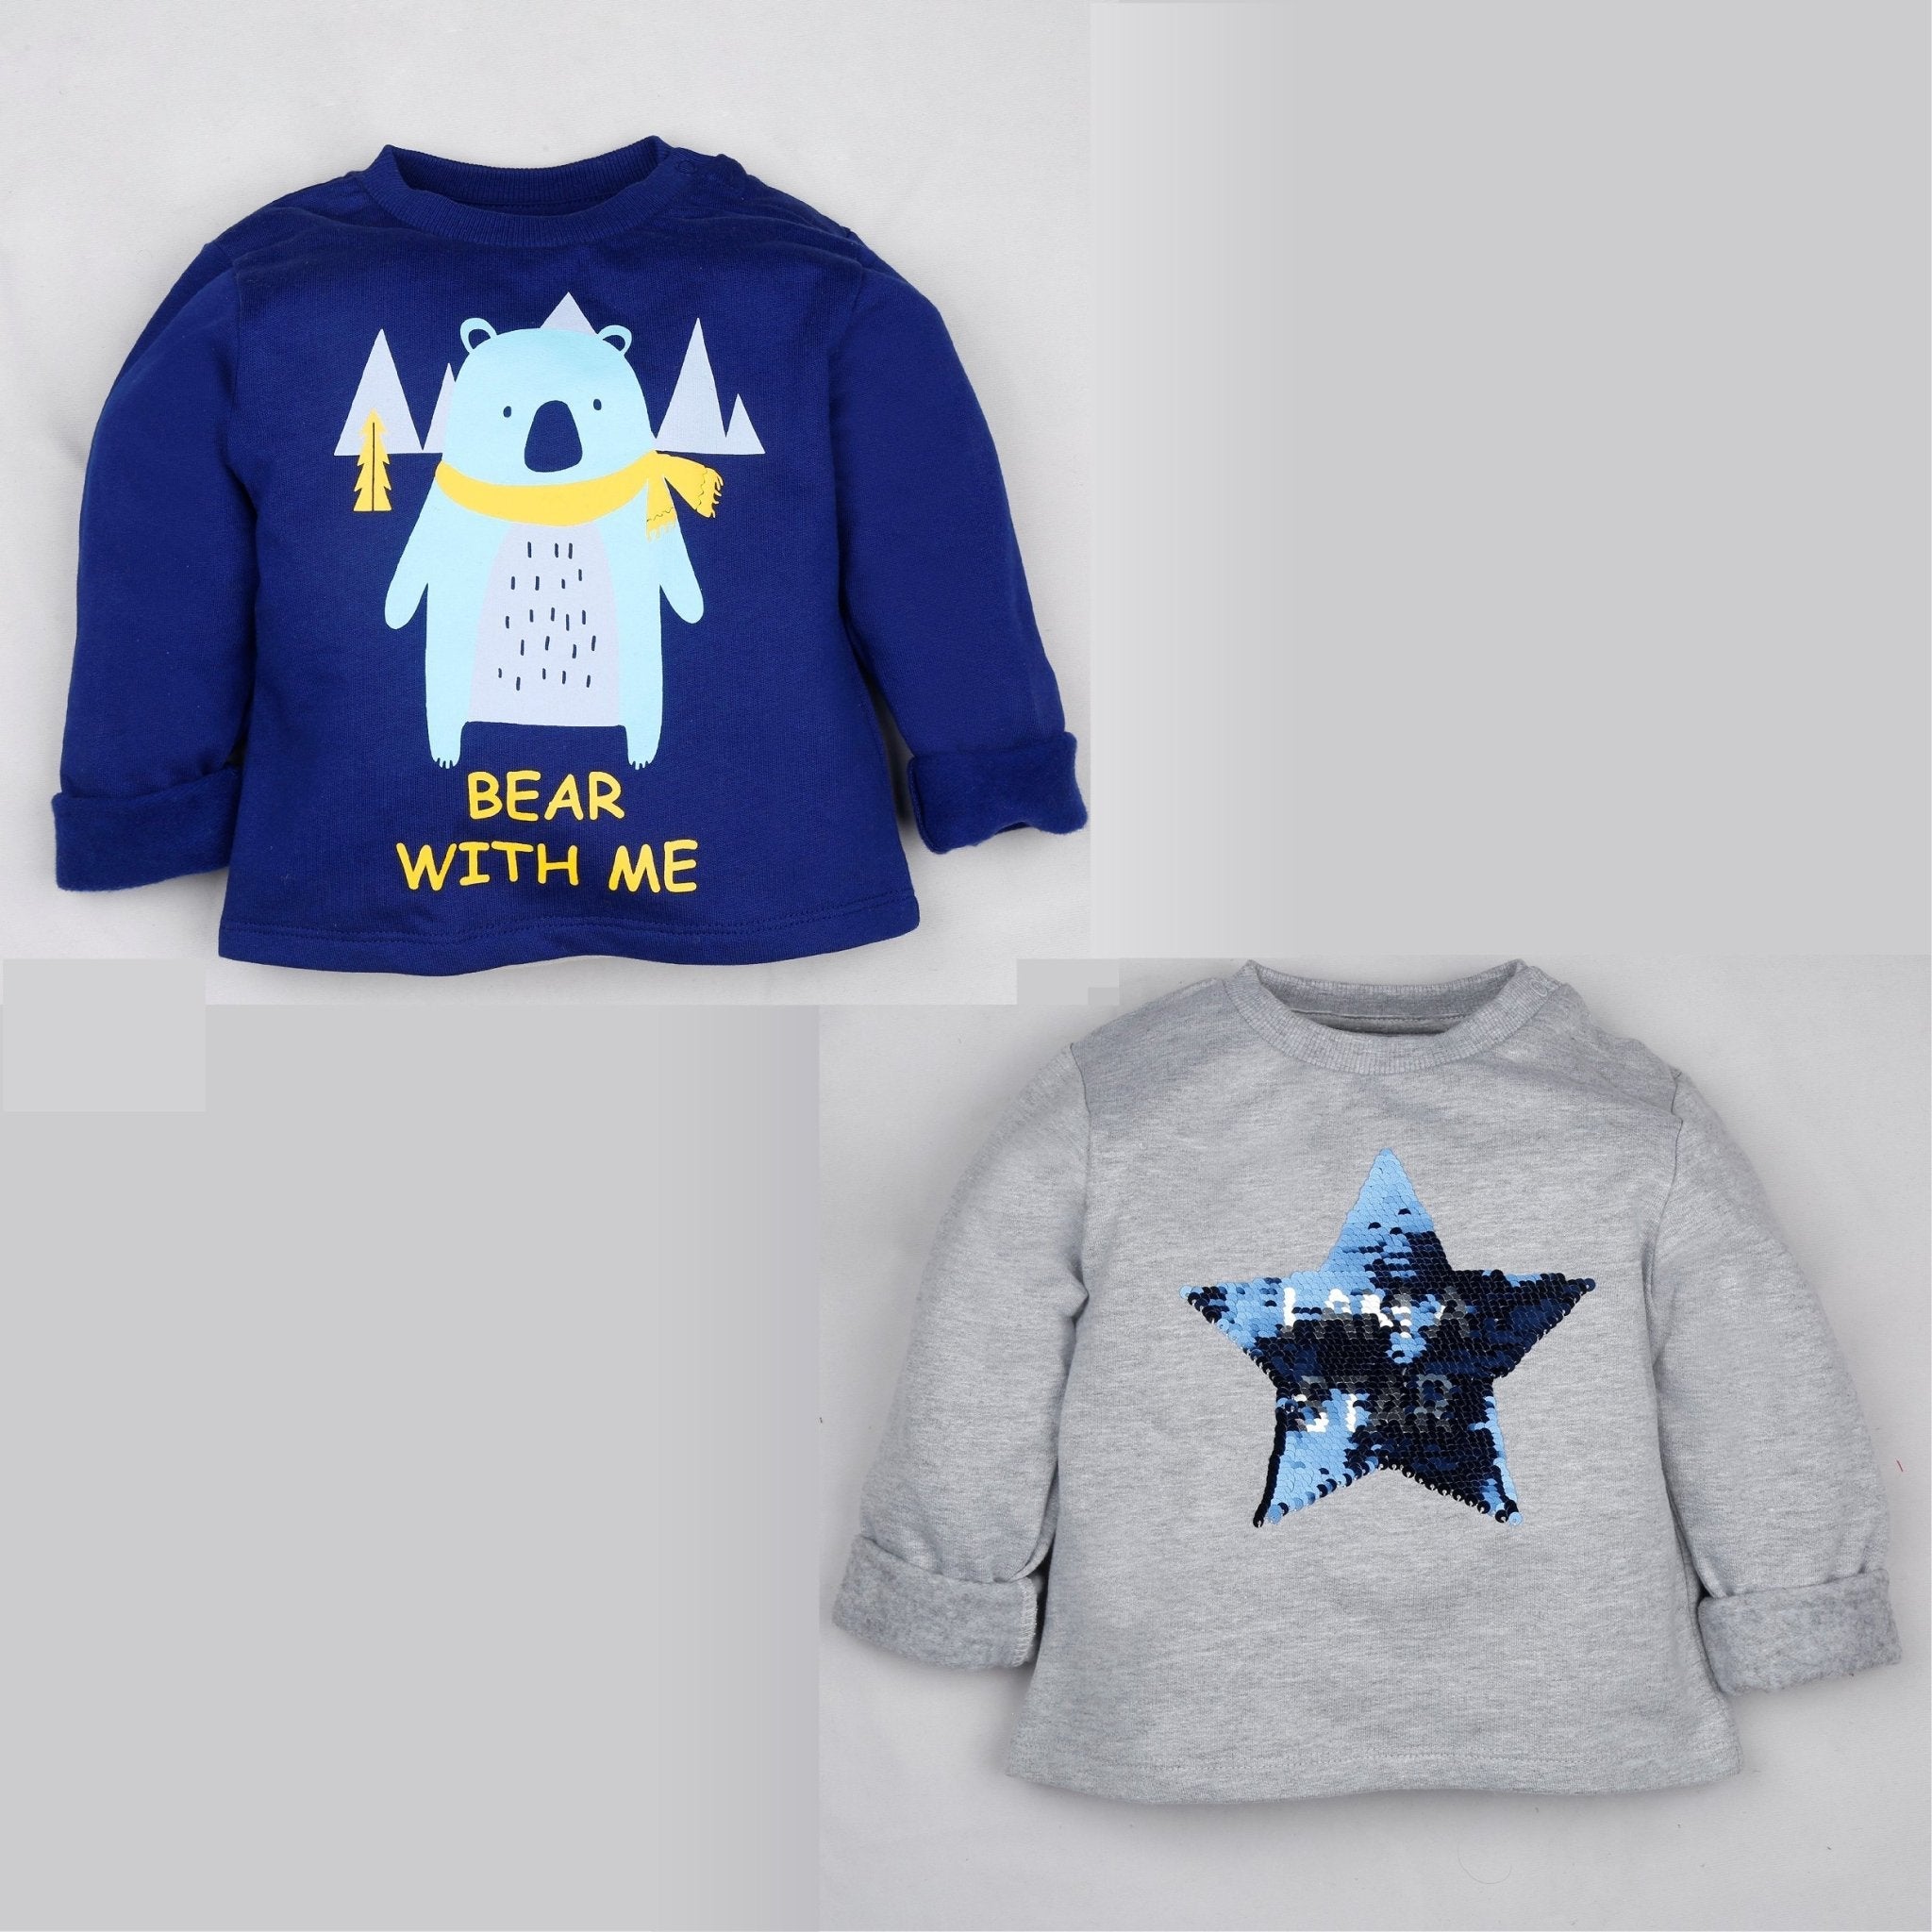 Sweatshirt Combo - Bear With Me & I Am A Star - The Mom Store